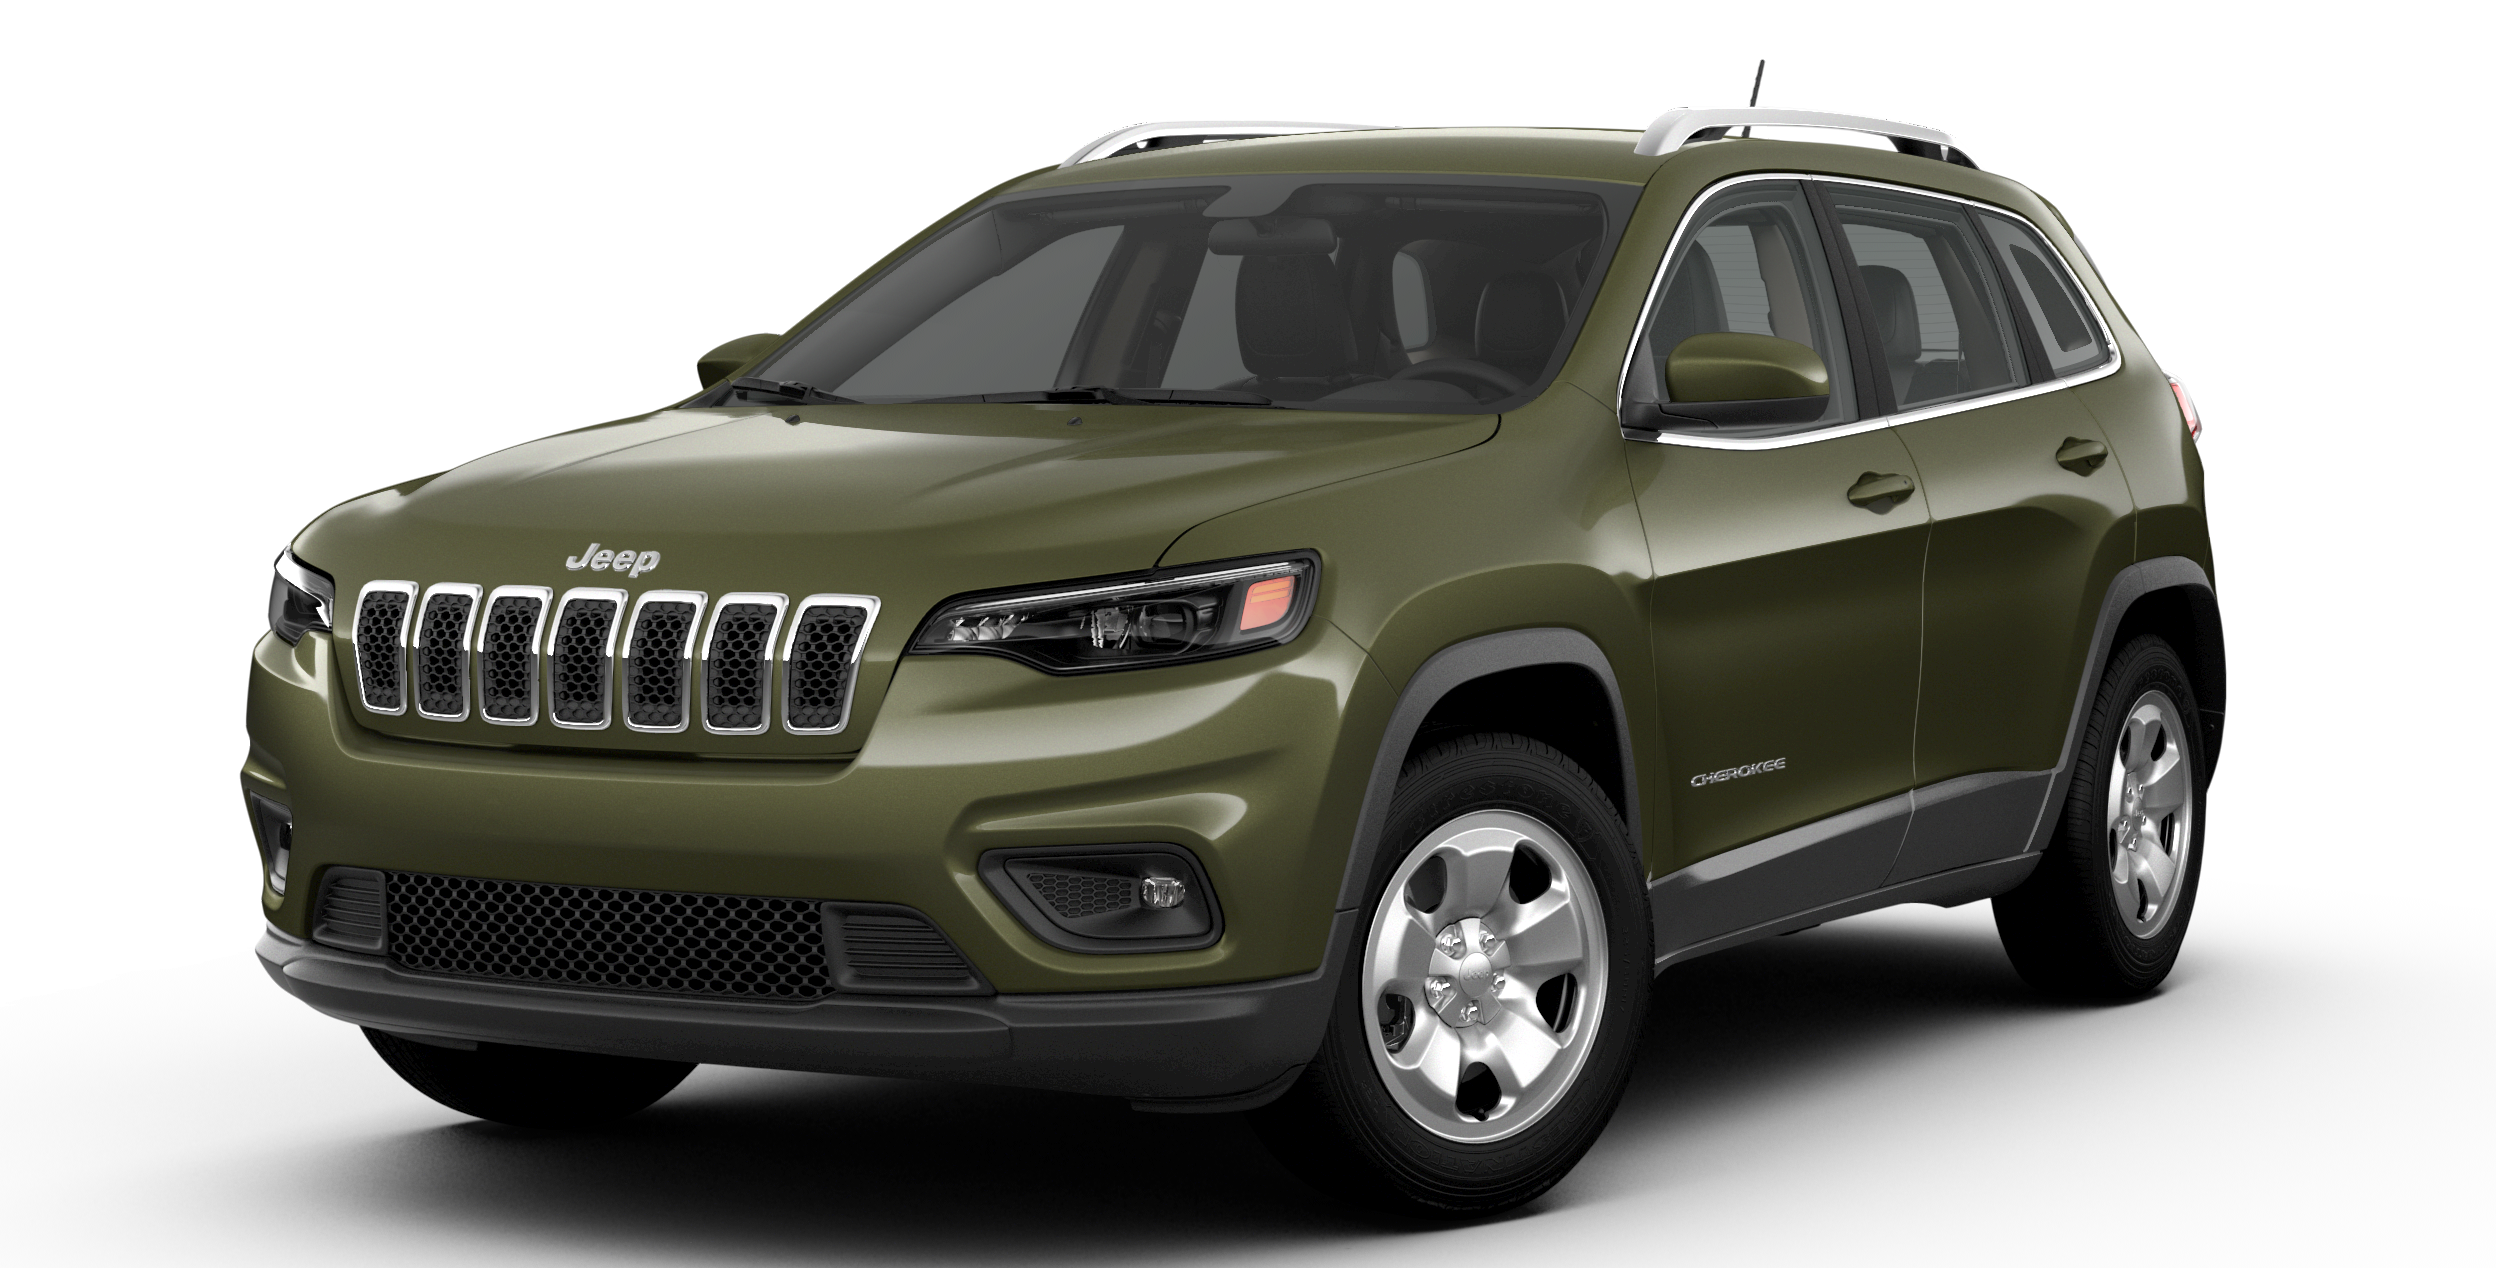 Jeep Cherokee Latitude design and styling